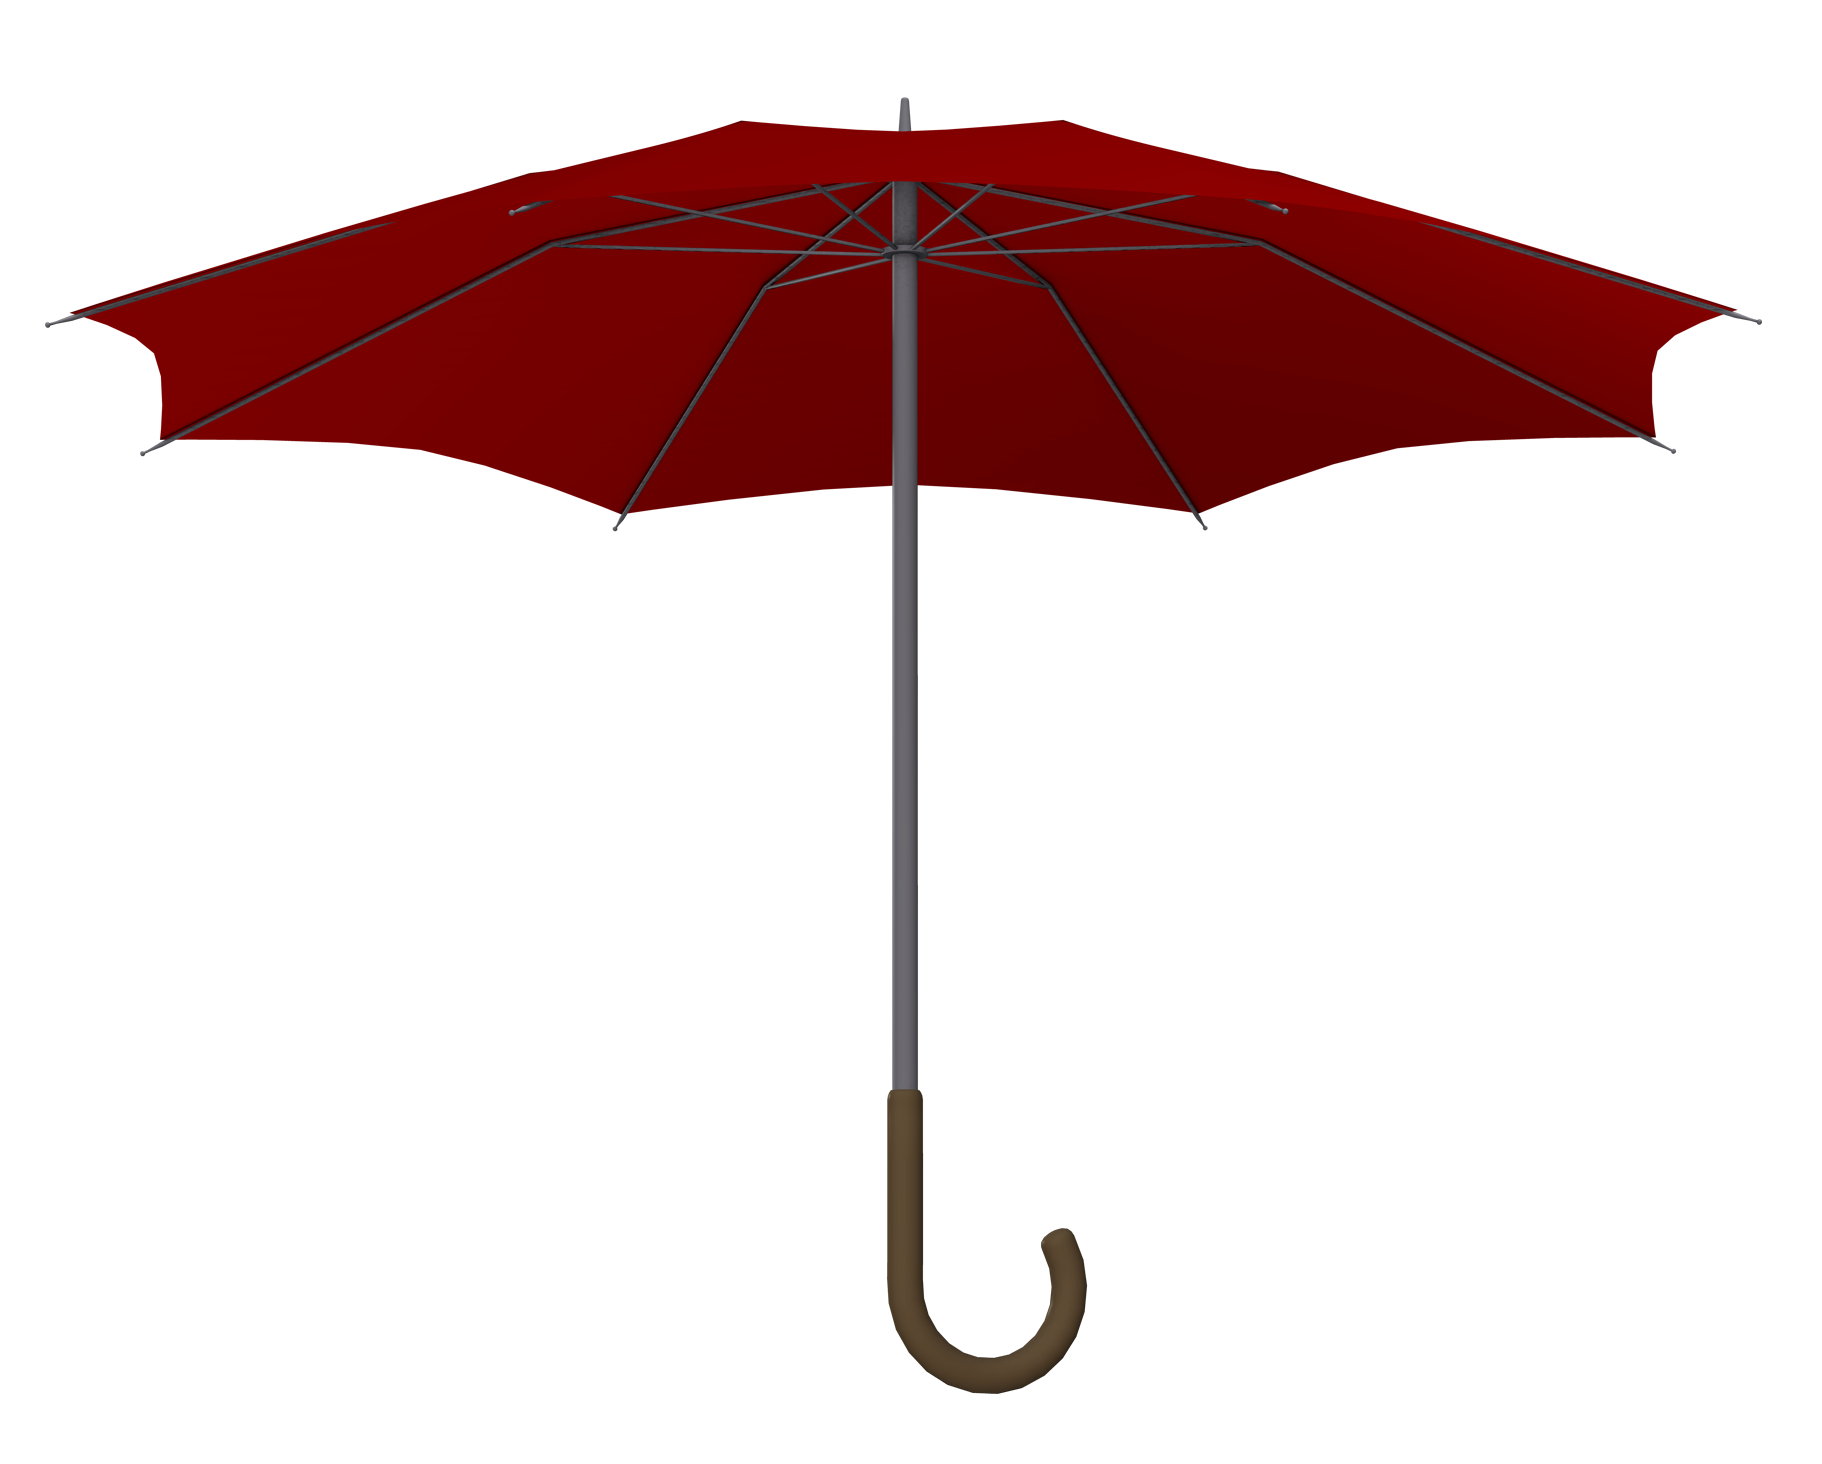 A Red Umbrella With A Wooden Handle